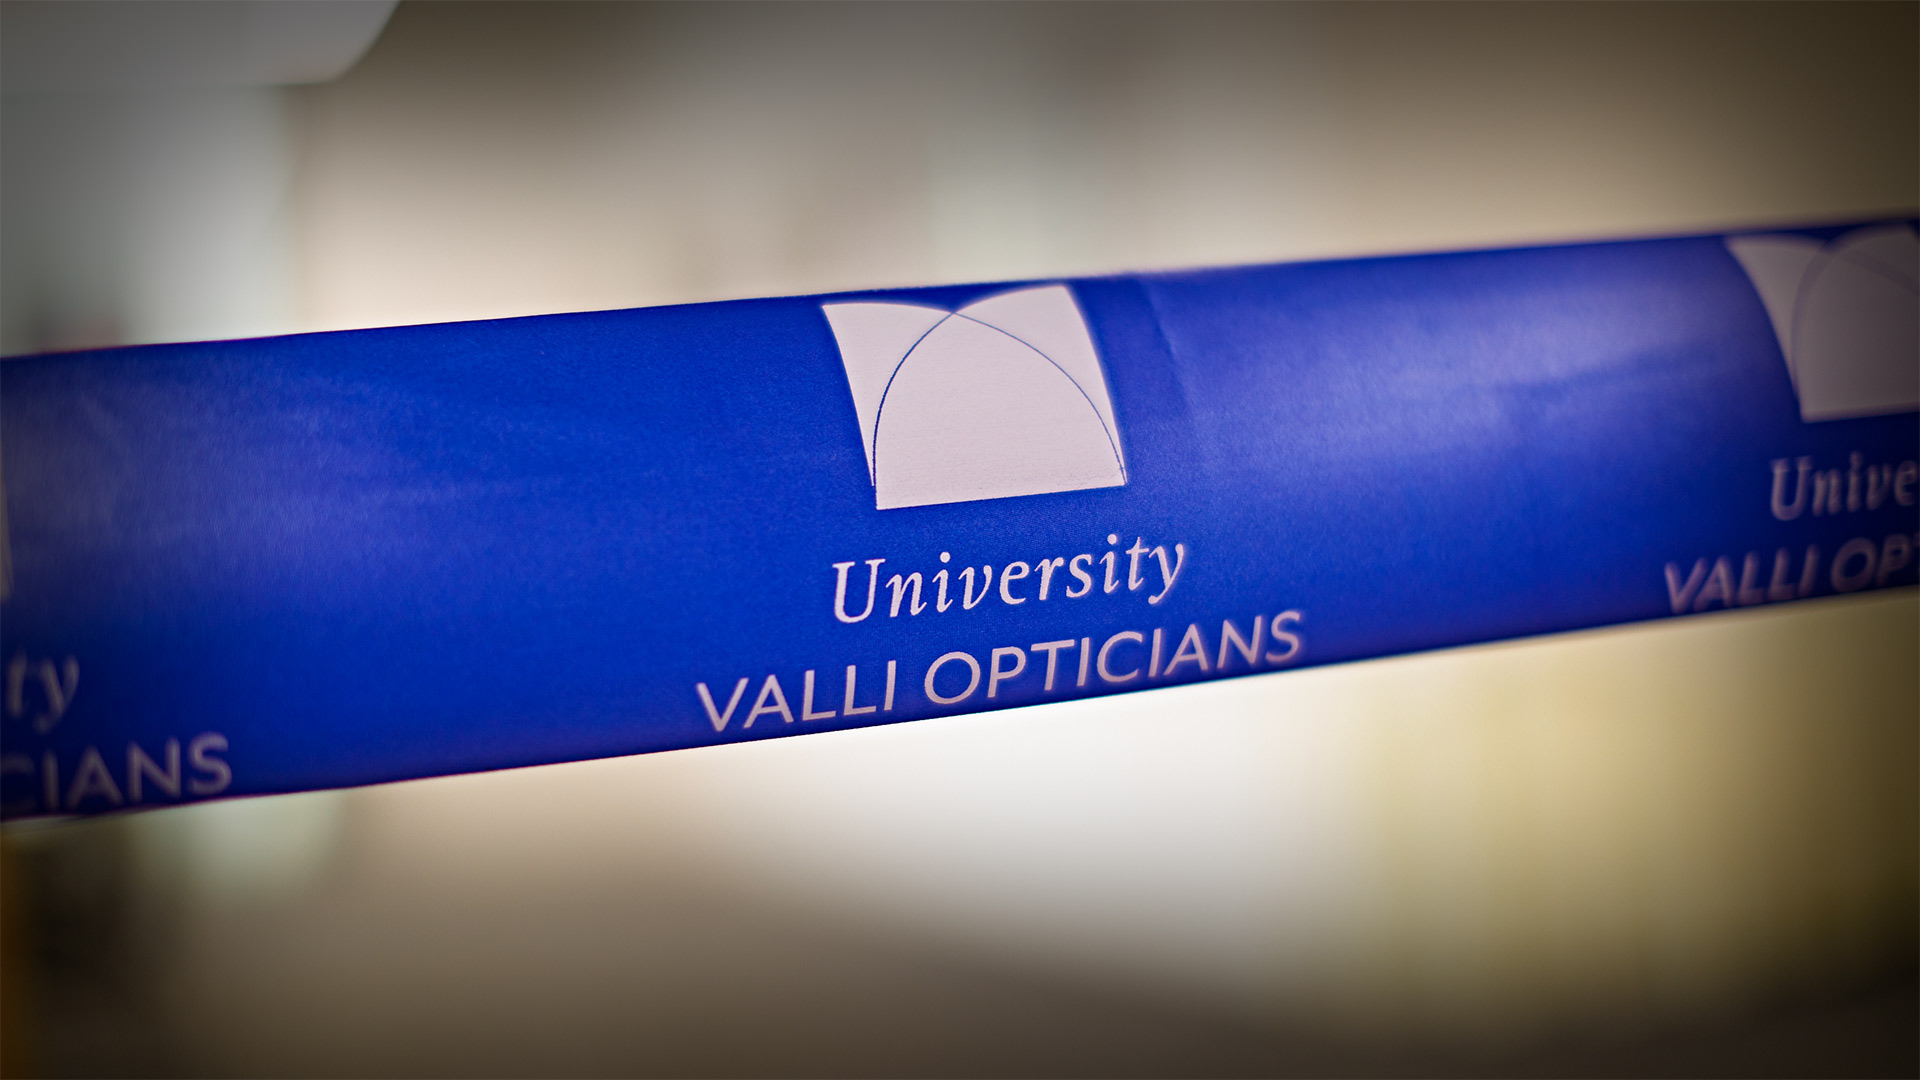 The ribbon displaying the University Valli Opticians logo at the official opening of the new eye clinic